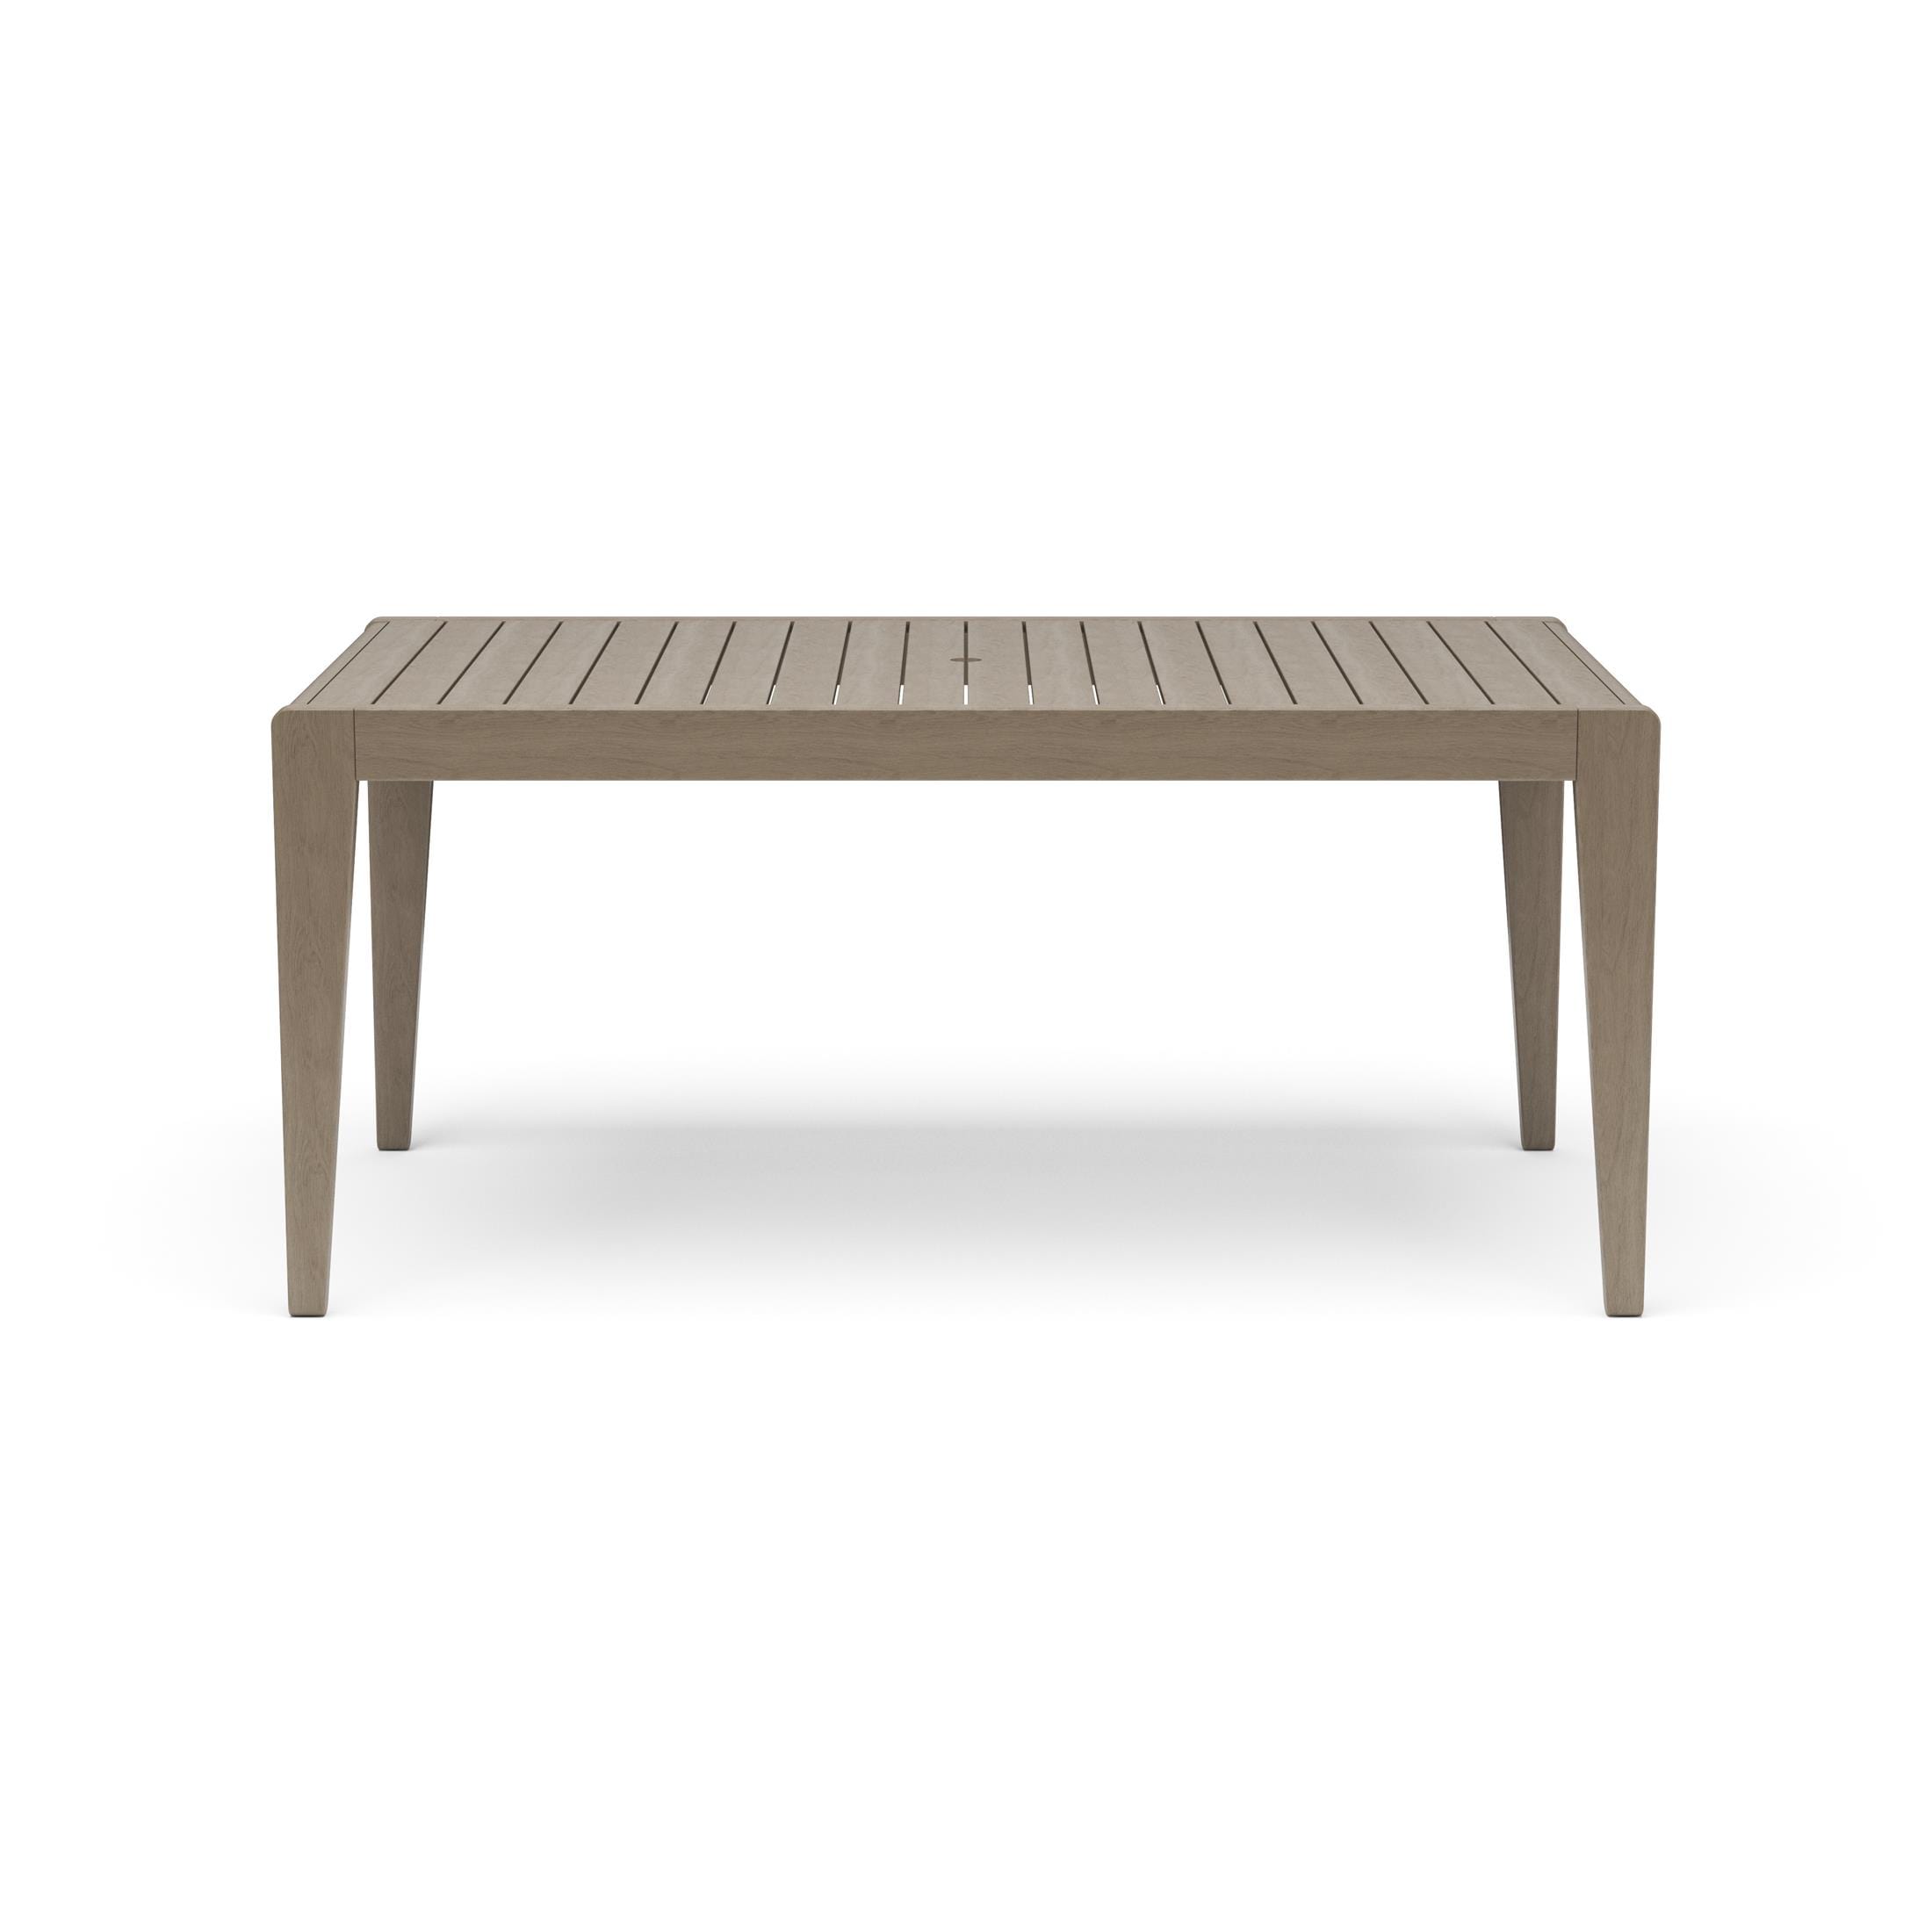 Sustain Outdoor Dining Table